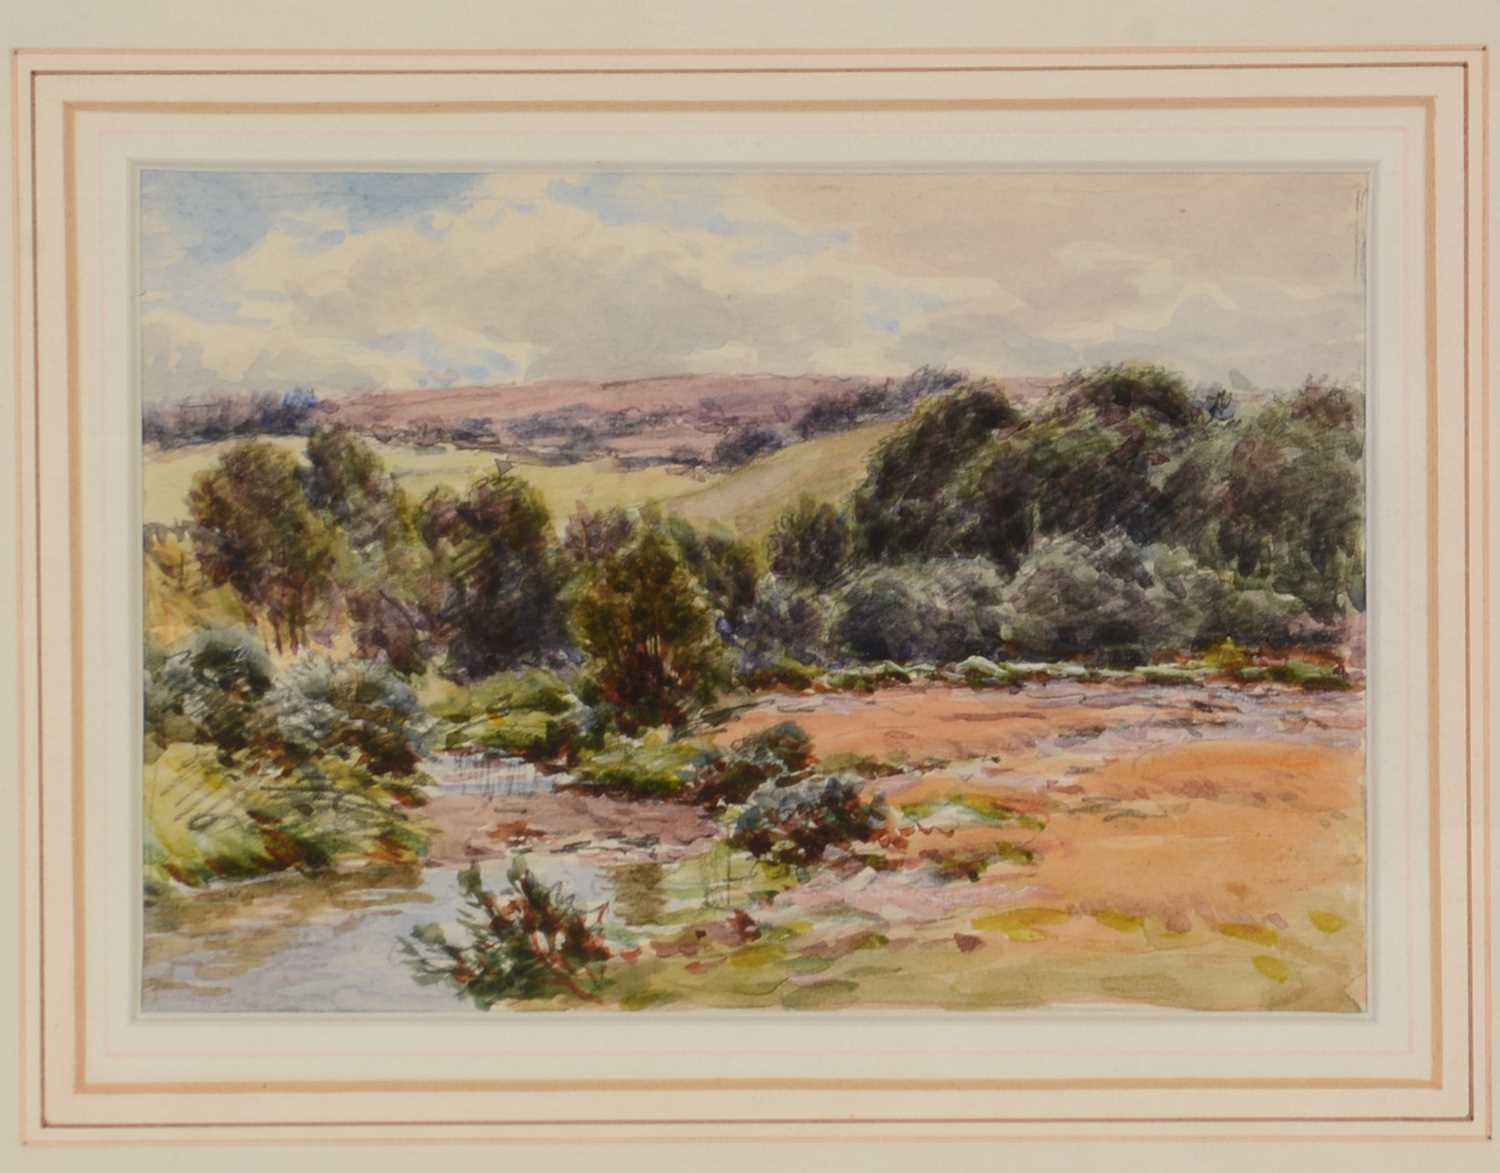 Harry James Sticks - watercolours - Image 3 of 5